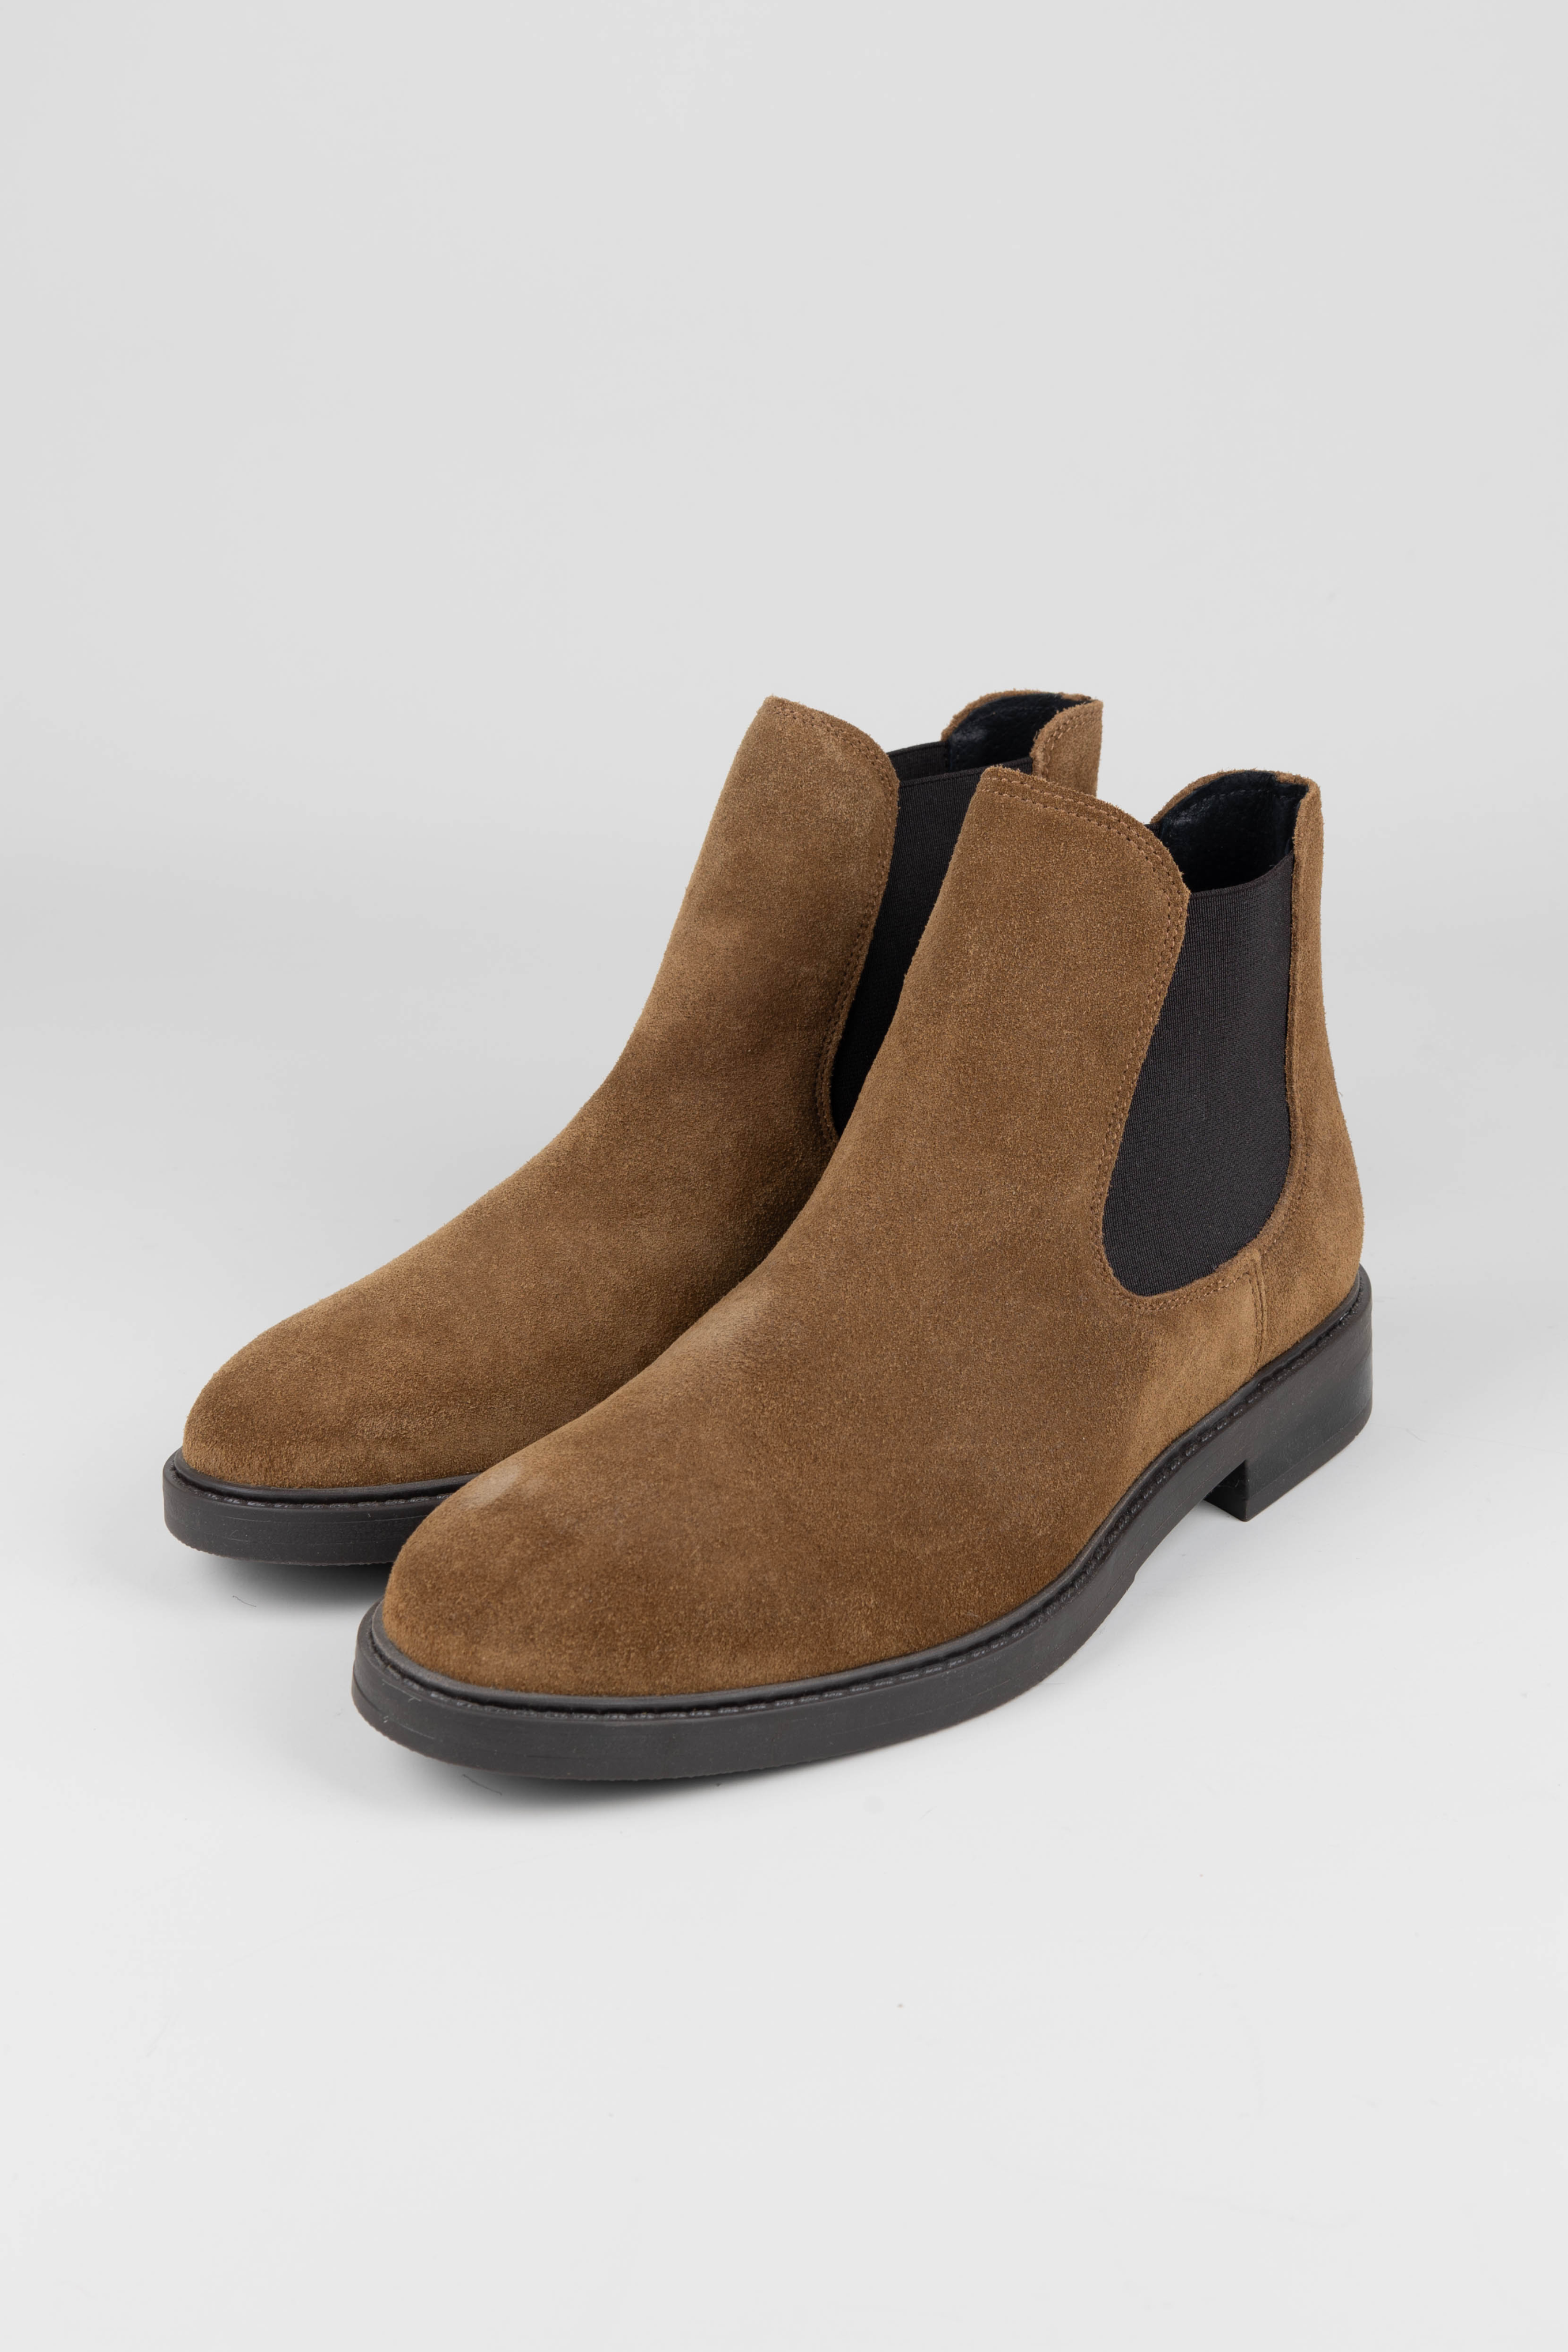 OU - SLHBLAKE SUEDE CHELSEA BOOTS MEN - TOBACCO BROWN